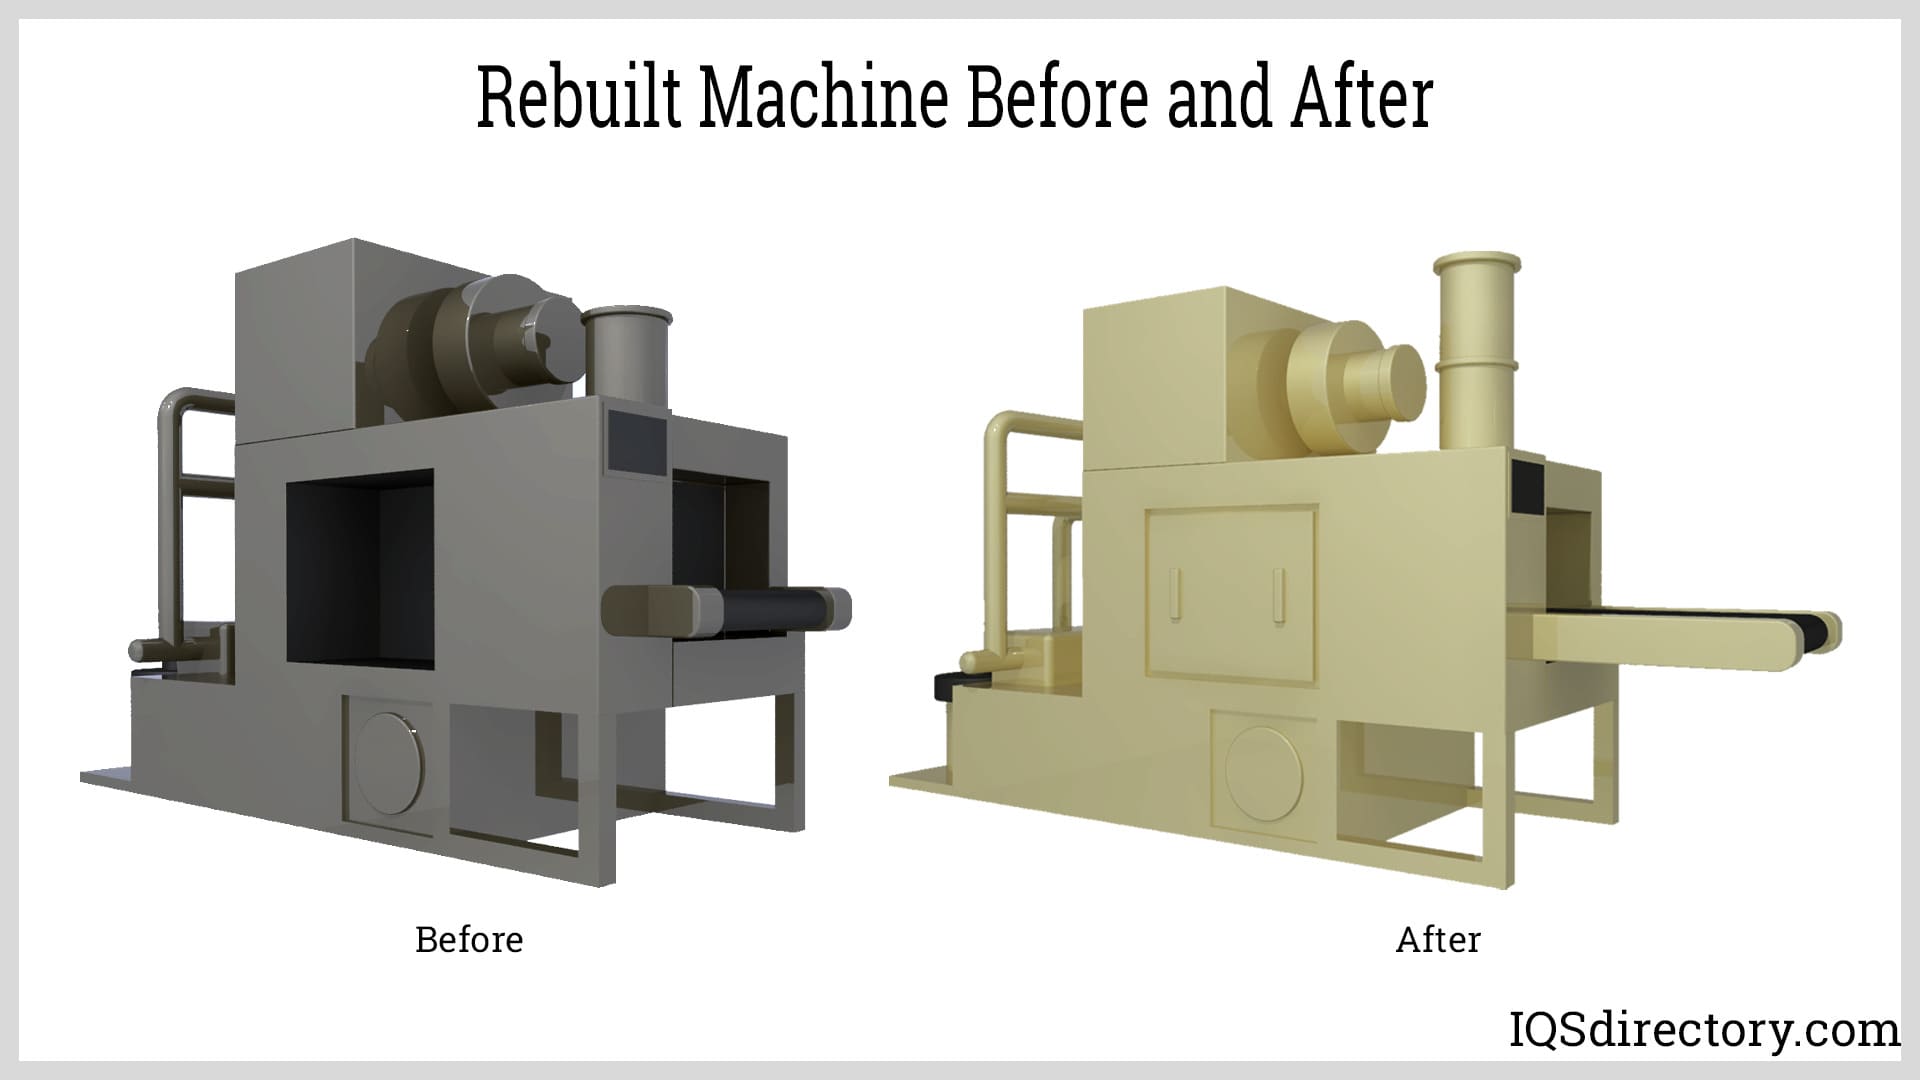 Rebuilt Machine Before and After